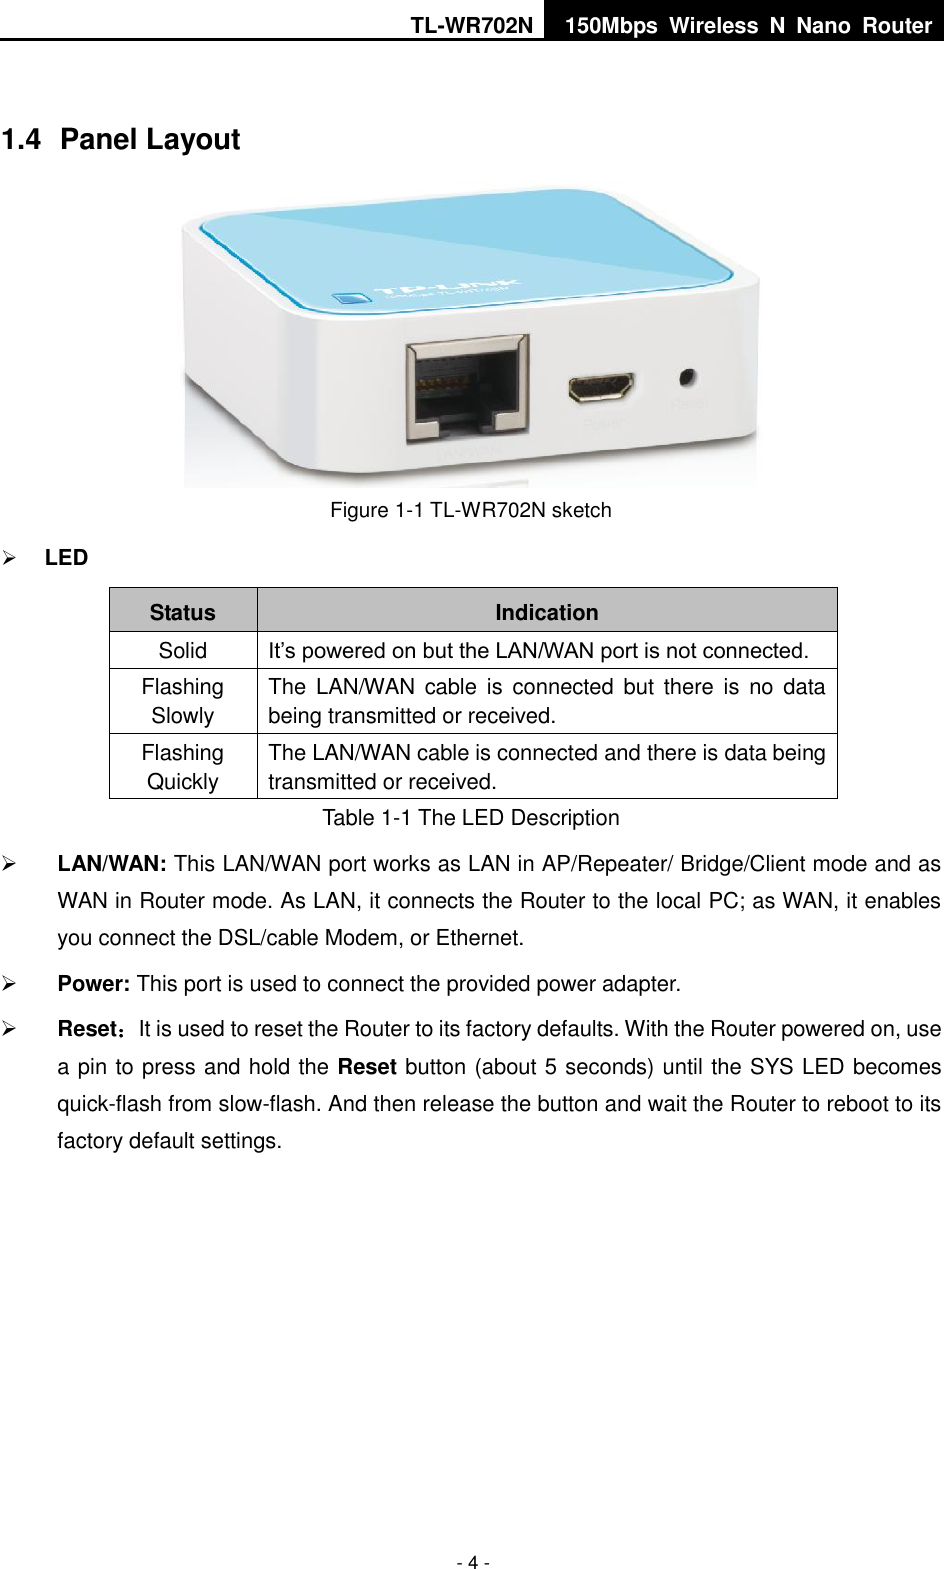 TL-WR702N 150Mbps  Wireless  N  Nano  Router  - 4 -  1.4  Panel Layout  Figure 1-1 TL-WR702N sketch  LED Status Indication Solid It’s powered on but the LAN/WAN port is not connected. Flashing Slowly The  LAN/WAN cable  is  connected  but  there  is  no  data being transmitted or received. Flashing Quickly The LAN/WAN cable is connected and there is data being transmitted or received. Table 1-1 The LED Description  LAN/WAN: This LAN/WAN port works as LAN in AP/Repeater/ Bridge/Client mode and as WAN in Router mode. As LAN, it connects the Router to the local PC; as WAN, it enables you connect the DSL/cable Modem, or Ethernet.  Power: This port is used to connect the provided power adapter.  Reset：It is used to reset the Router to its factory defaults. With the Router powered on, use a pin to press and hold the Reset button (about 5 seconds) until the SYS LED becomes quick-flash from slow-flash. And then release the button and wait the Router to reboot to its factory default settings. 